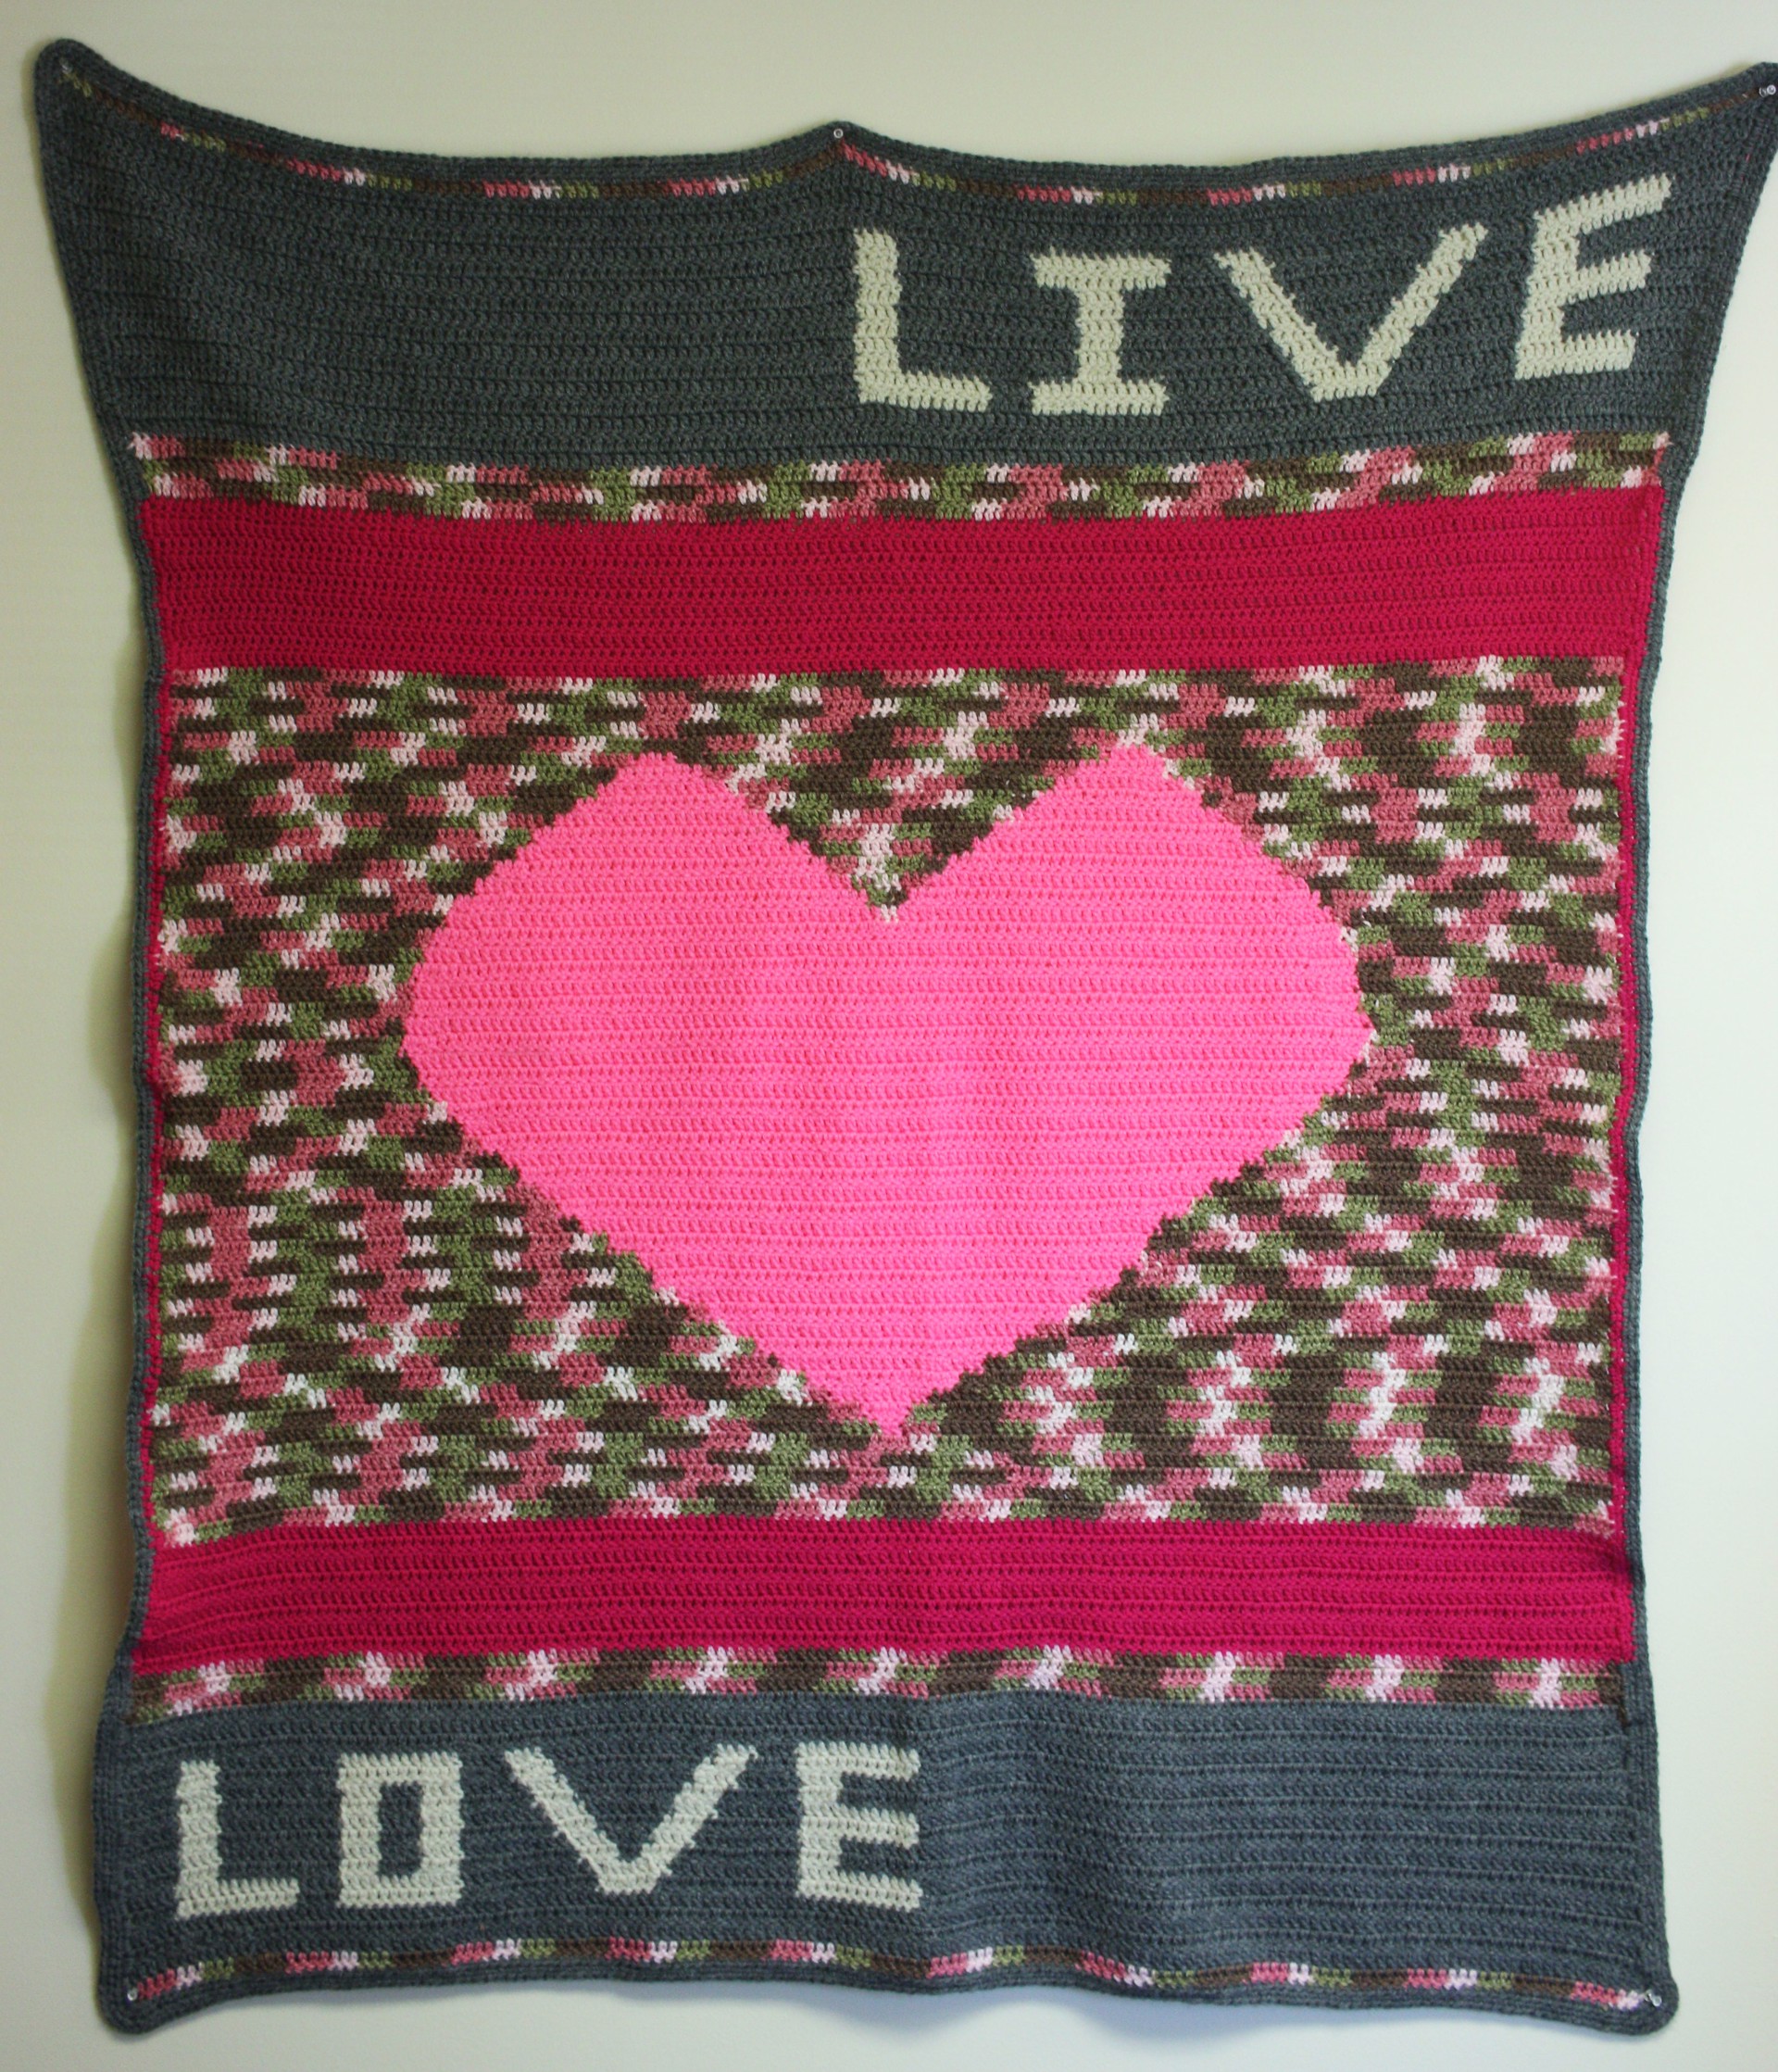 Live Love Blanket by Luther Hampson